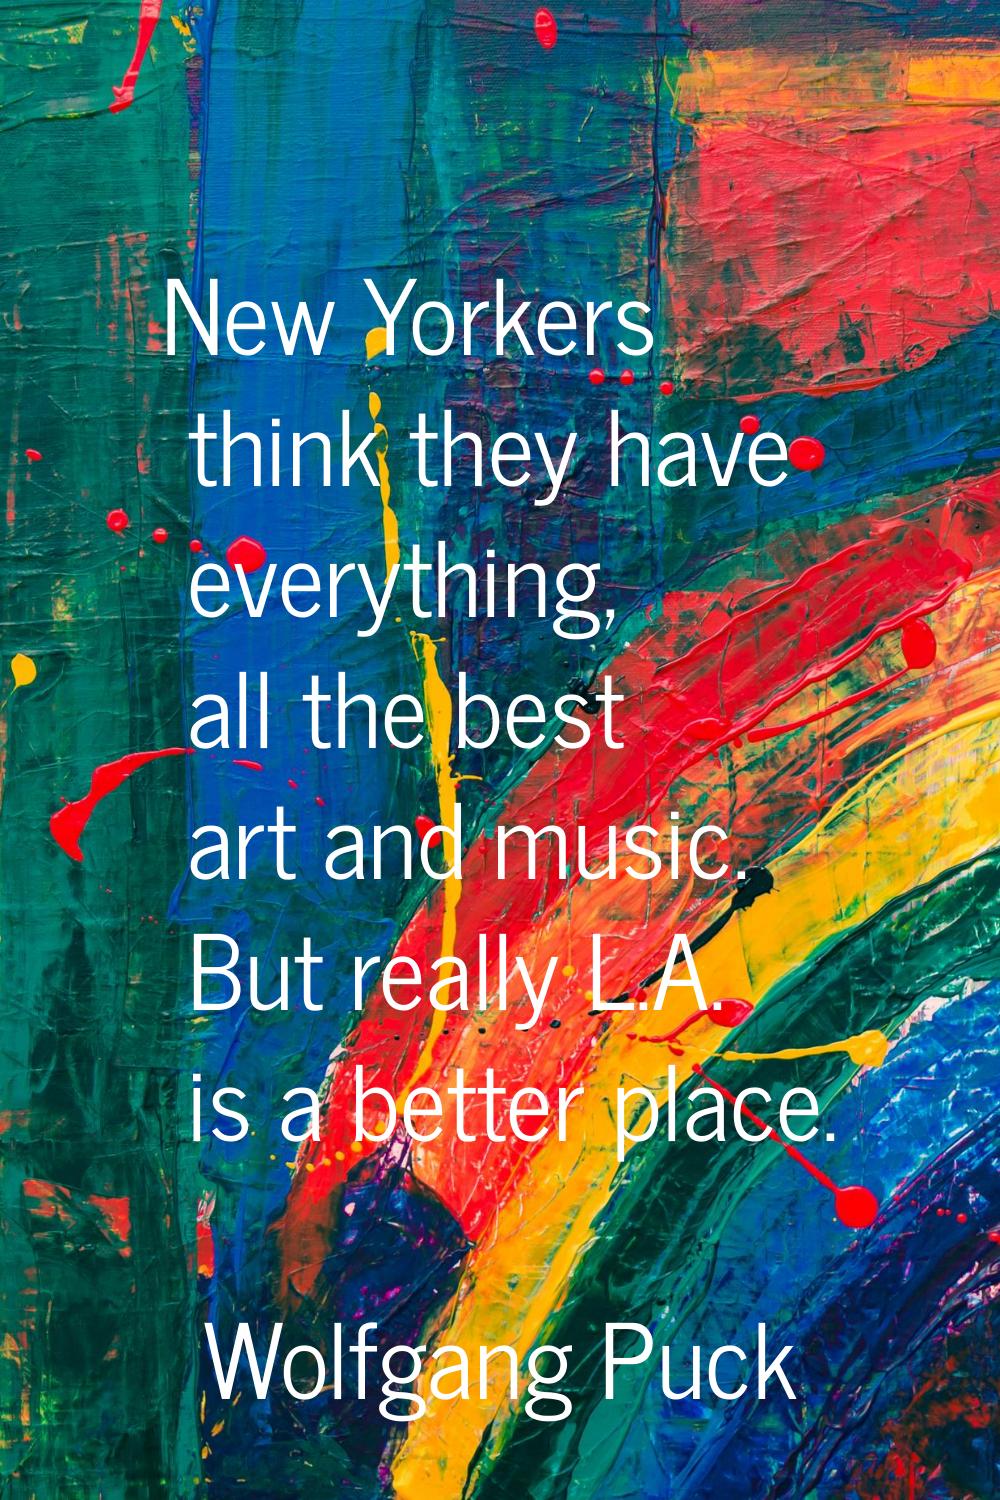 New Yorkers think they have everything, all the best art and music. But really L.A. is a better pla